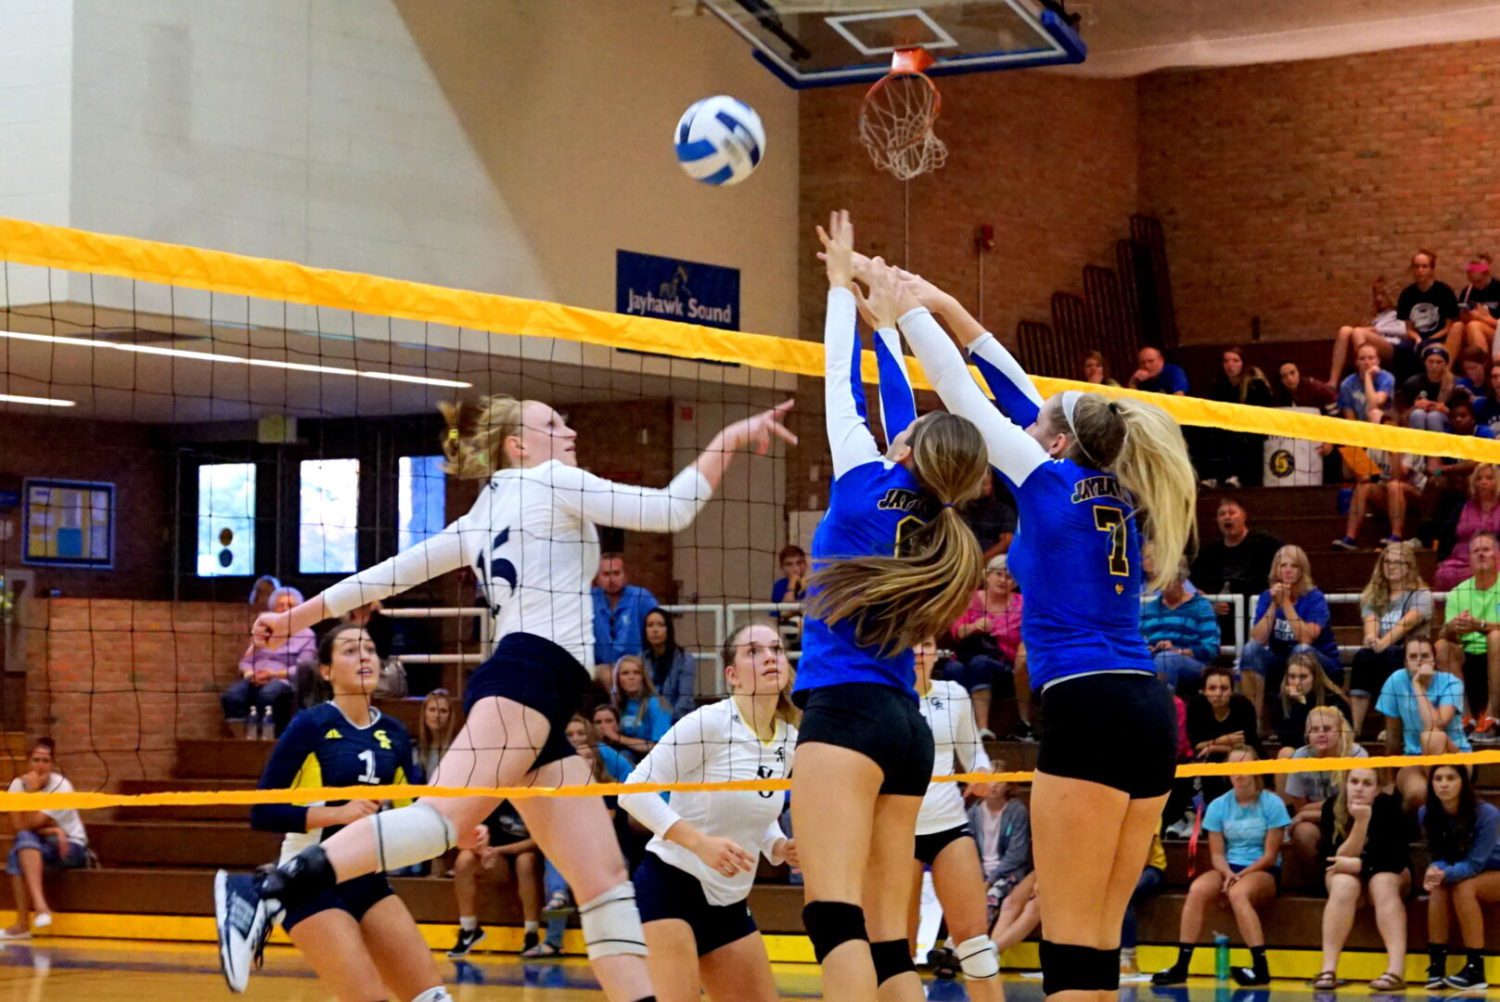 MCC Jayhawks volleyball team drop huge lead, fall to GRCC in five sets ...